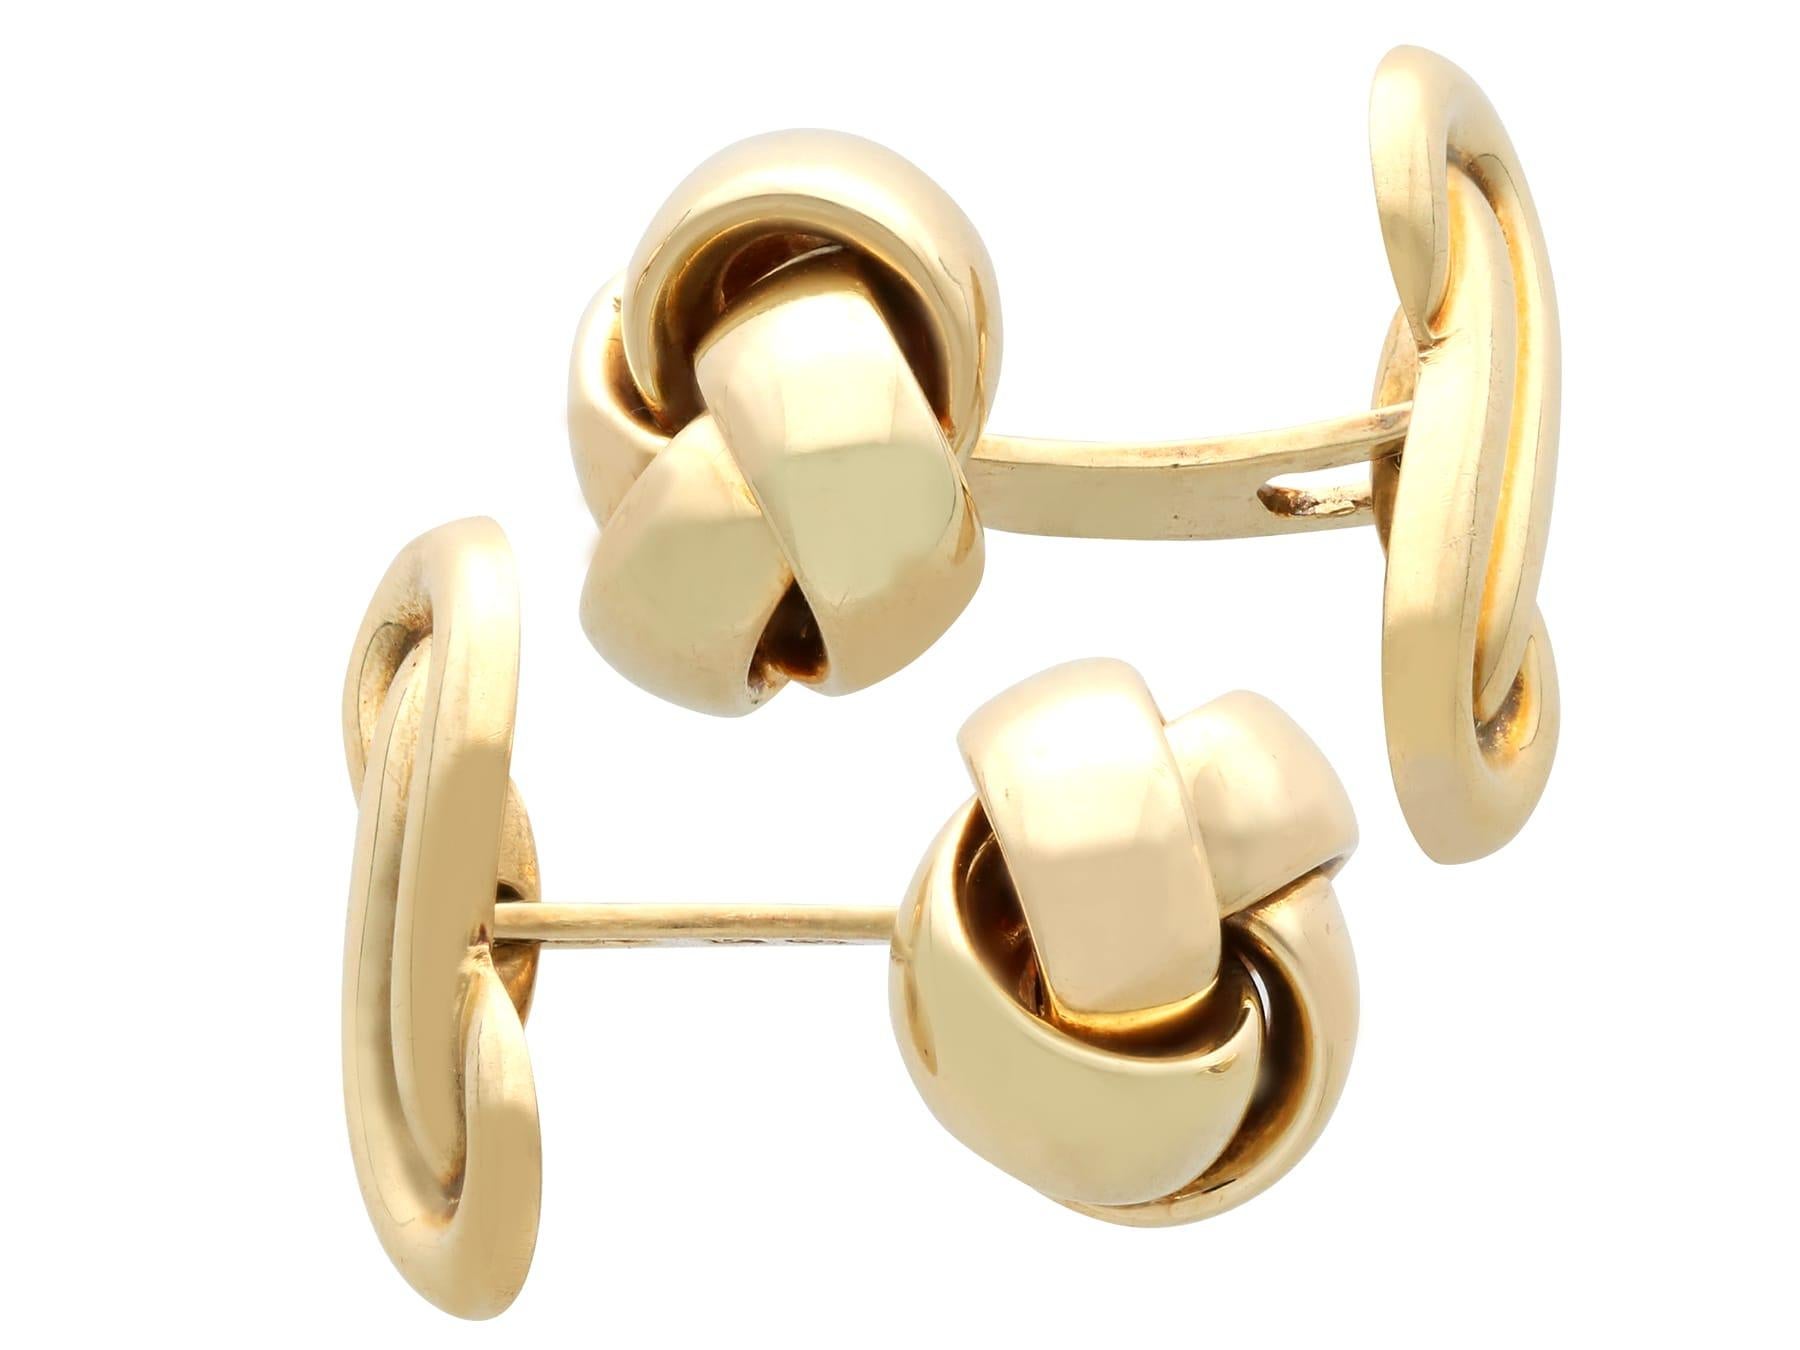 A fine and impressive pair of vintage 14 karat yellow gold knot cufflinks; an addition to our men's jewelry and vintage cufflink collection.

These authentic vintage cufflinks have been crafted in 14k yellow gold.

The anterior link of each cufflink